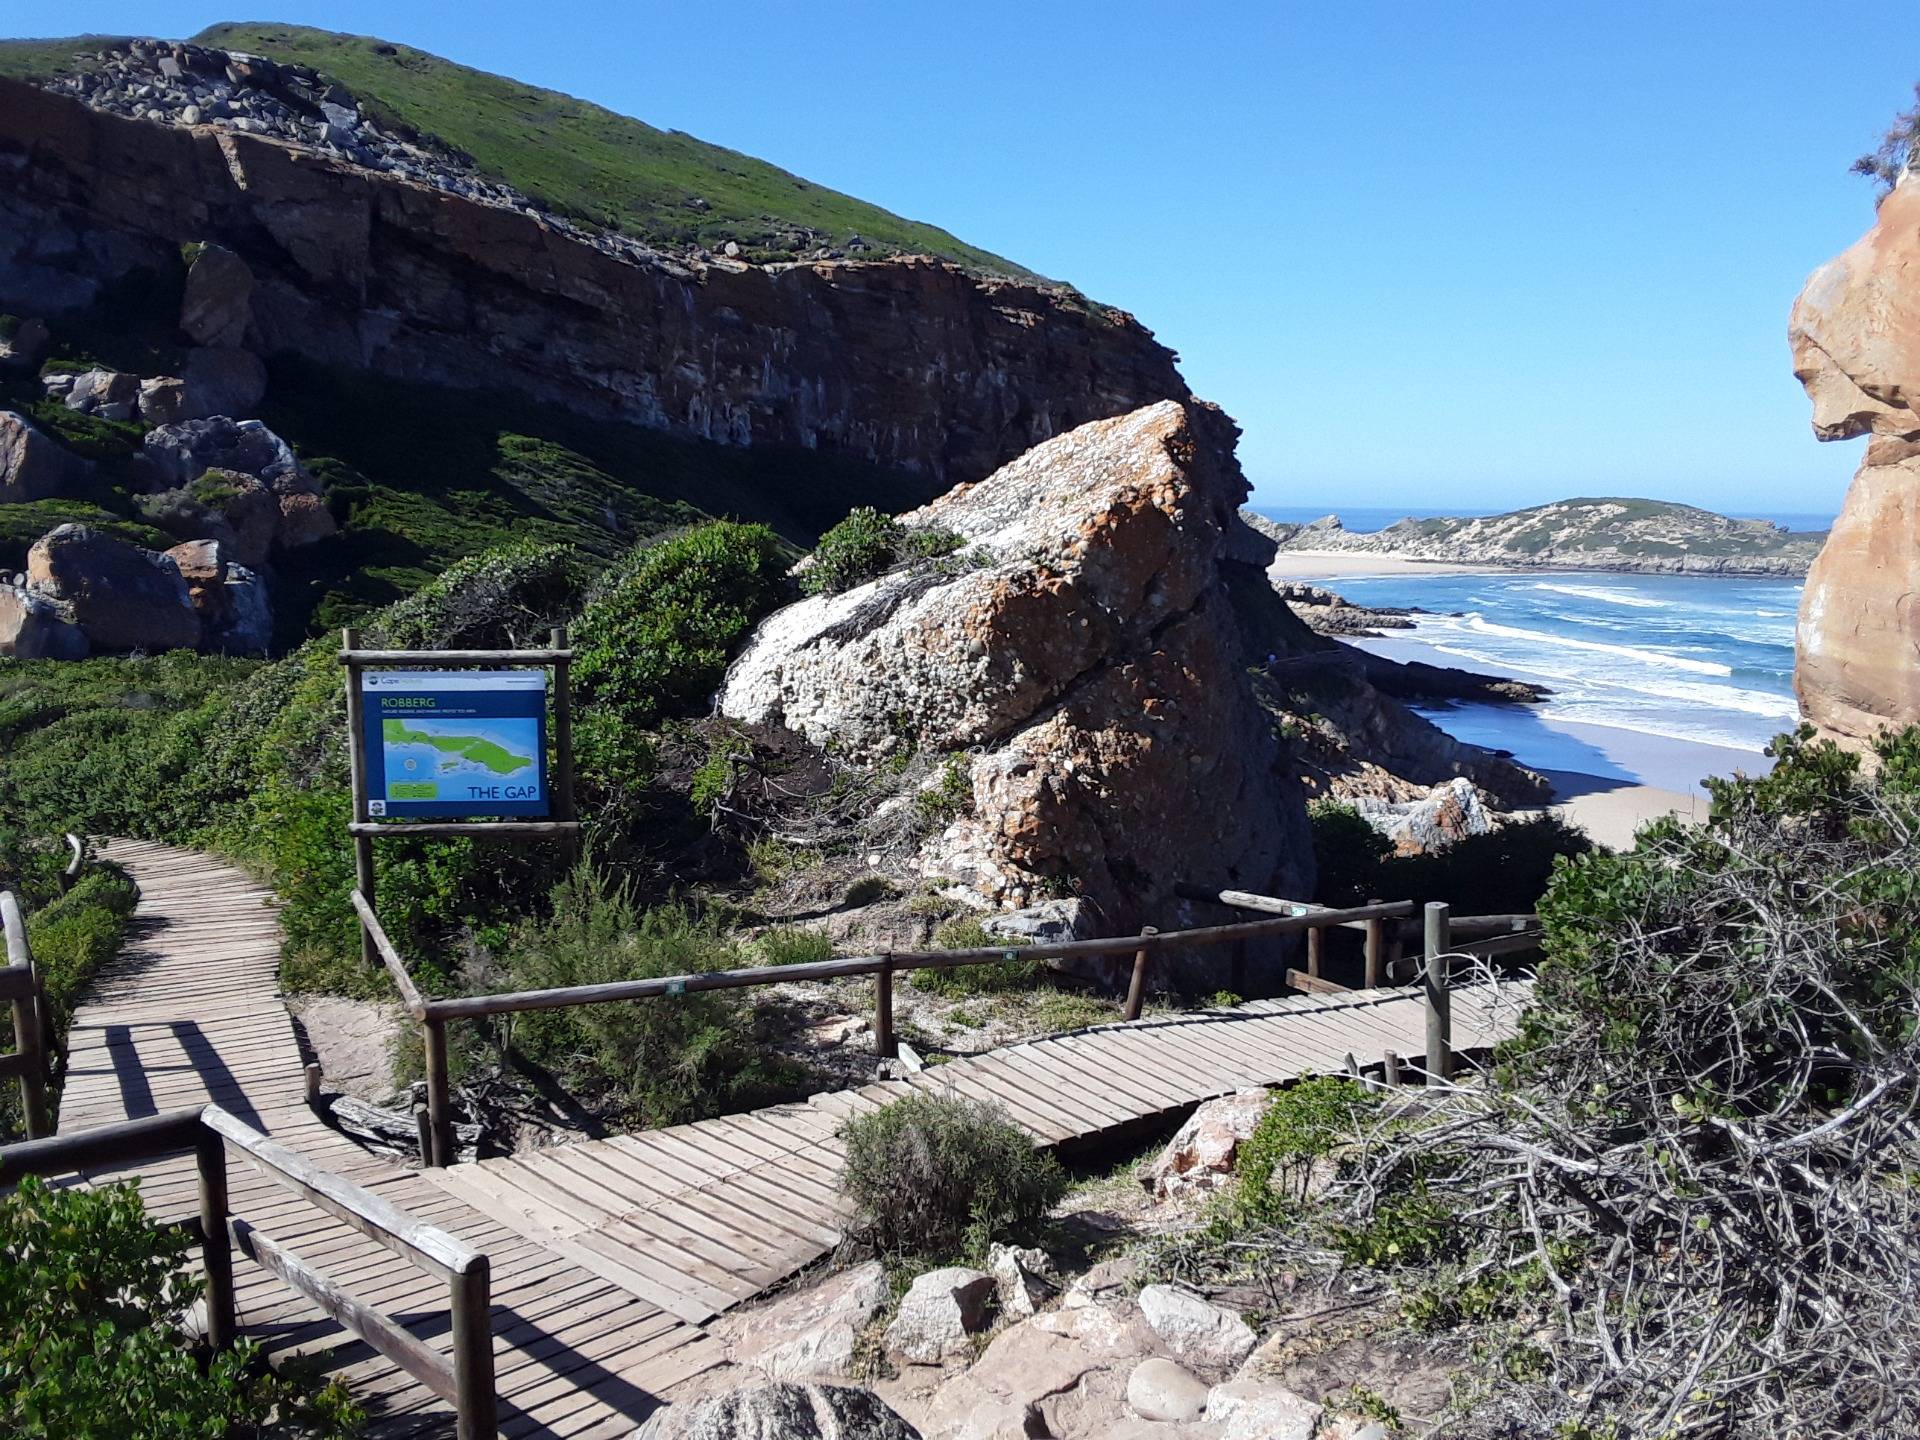 A beautiful scene on the Robberg peninsula - a magical place for all who reside around her.